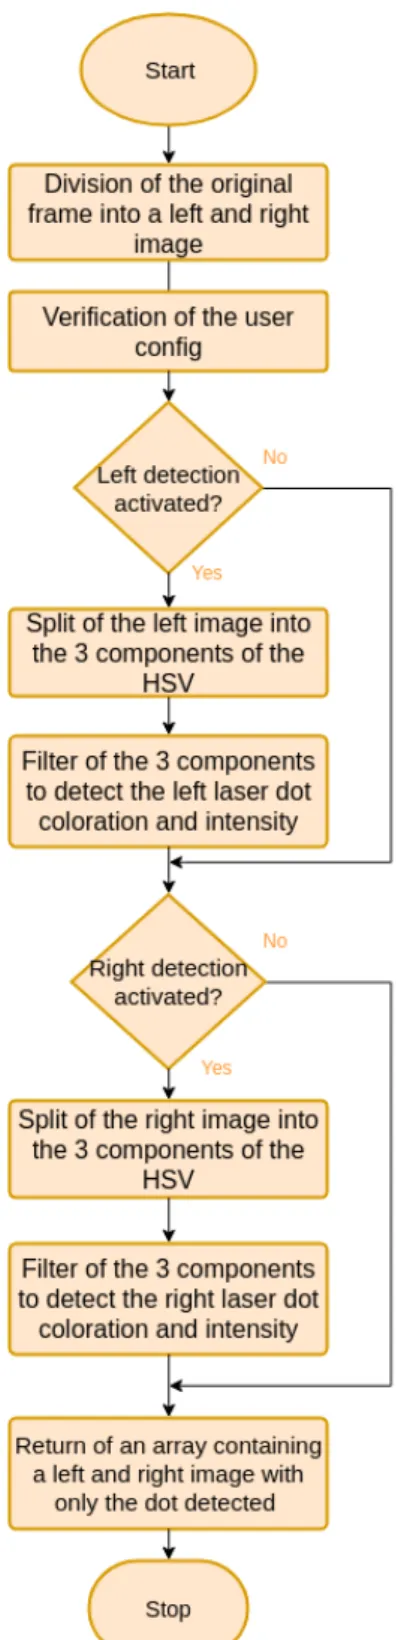 Figure 3.5: Flowchart of the operations that occur in the detectDots method .